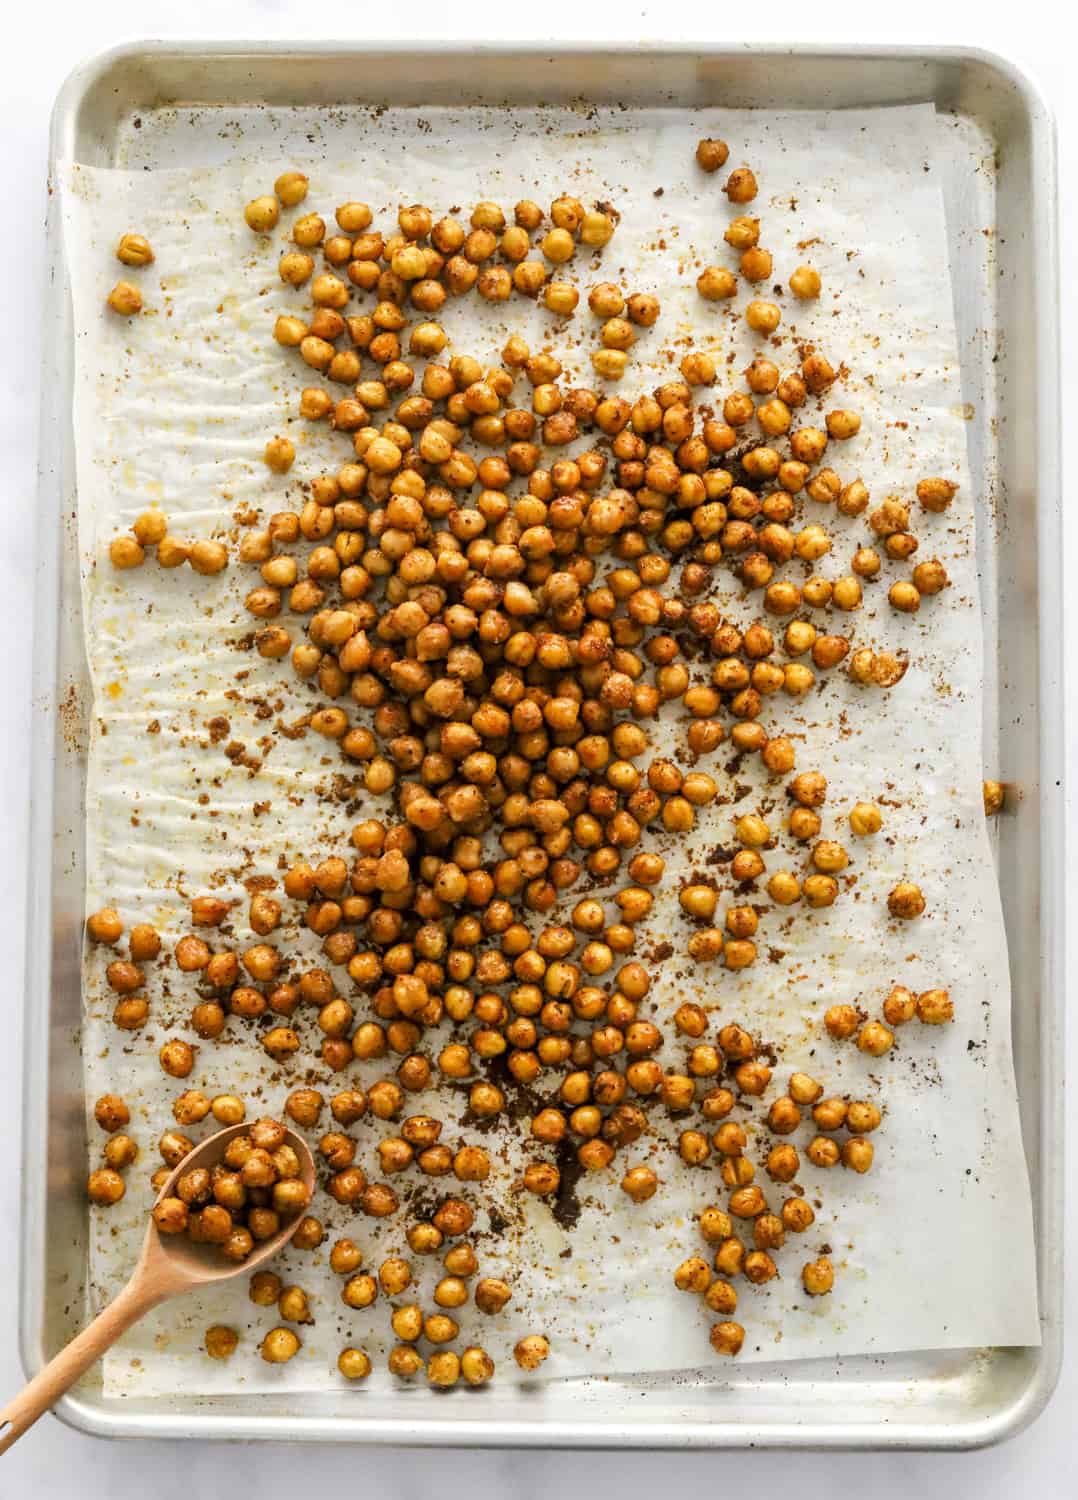 Crispy, seasoned oven roasted chickpeas that are golden brown on a parchment paper lined baking sheet with a small wooden spoon on the pan. 